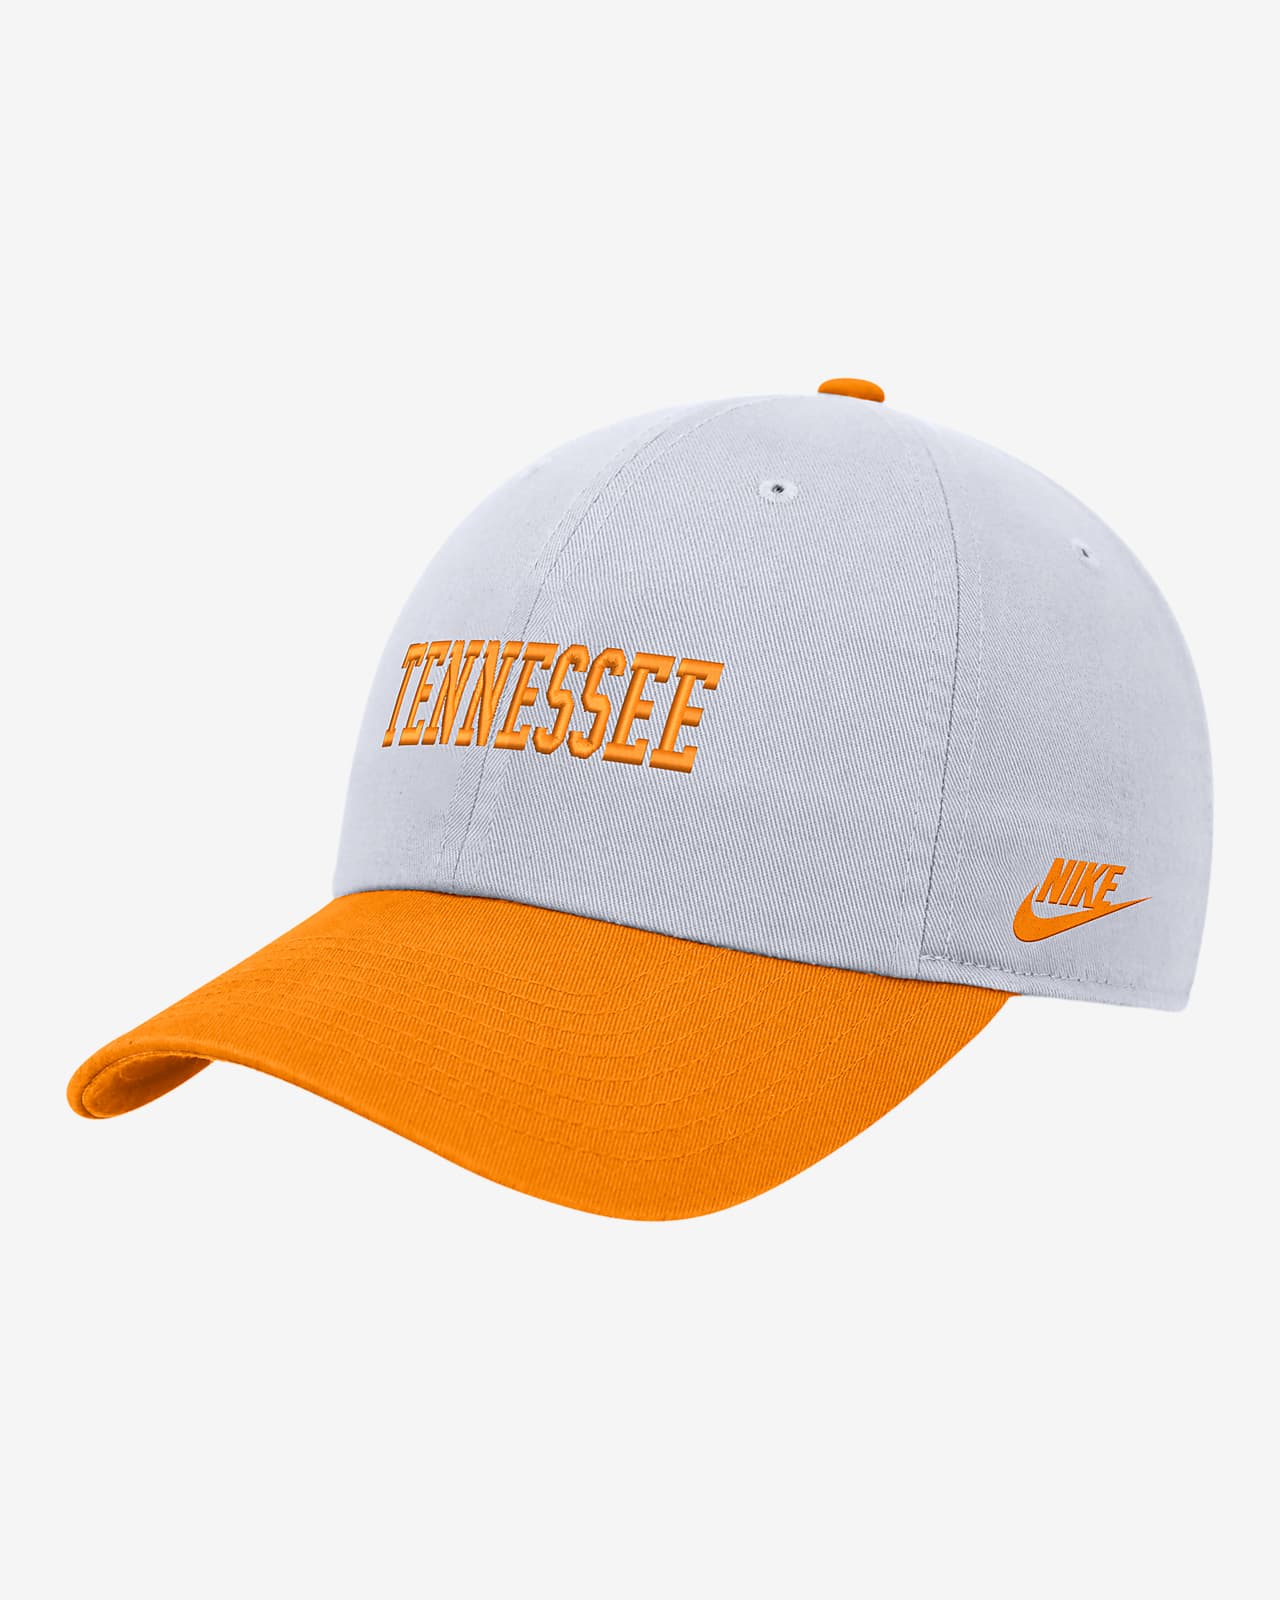 Tennessee Nike College Campus Cap